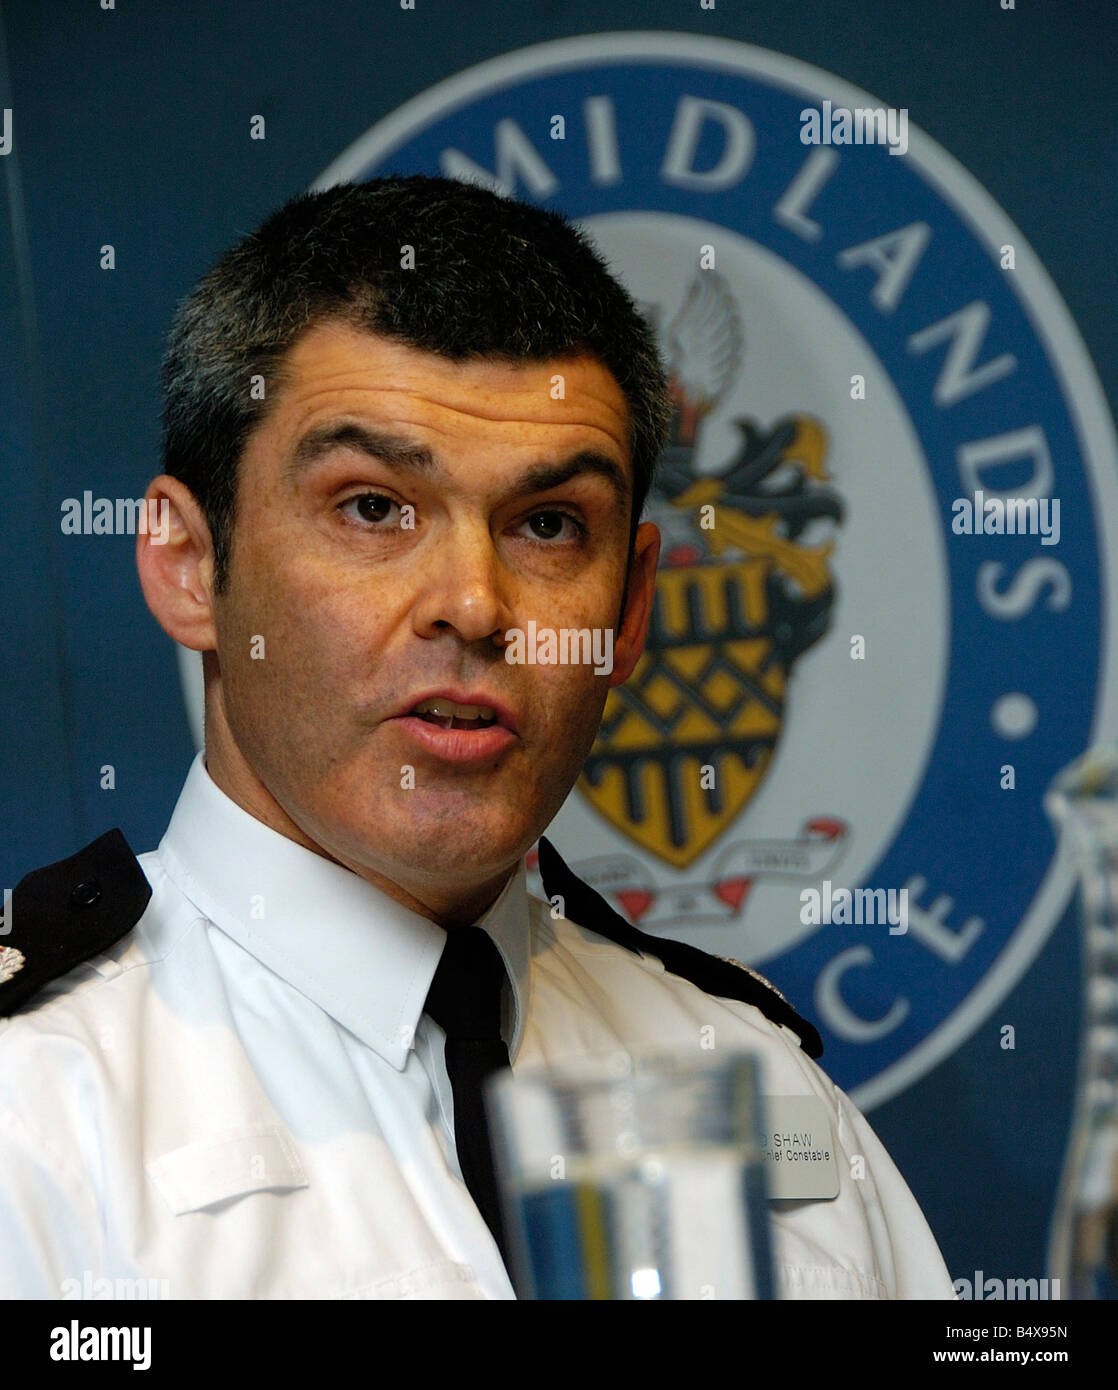 Acting Chief Constable David Shaw at the West Midlands Police press conference in Birmingham.&#13;&#10;31st January 2007 Stock Photo